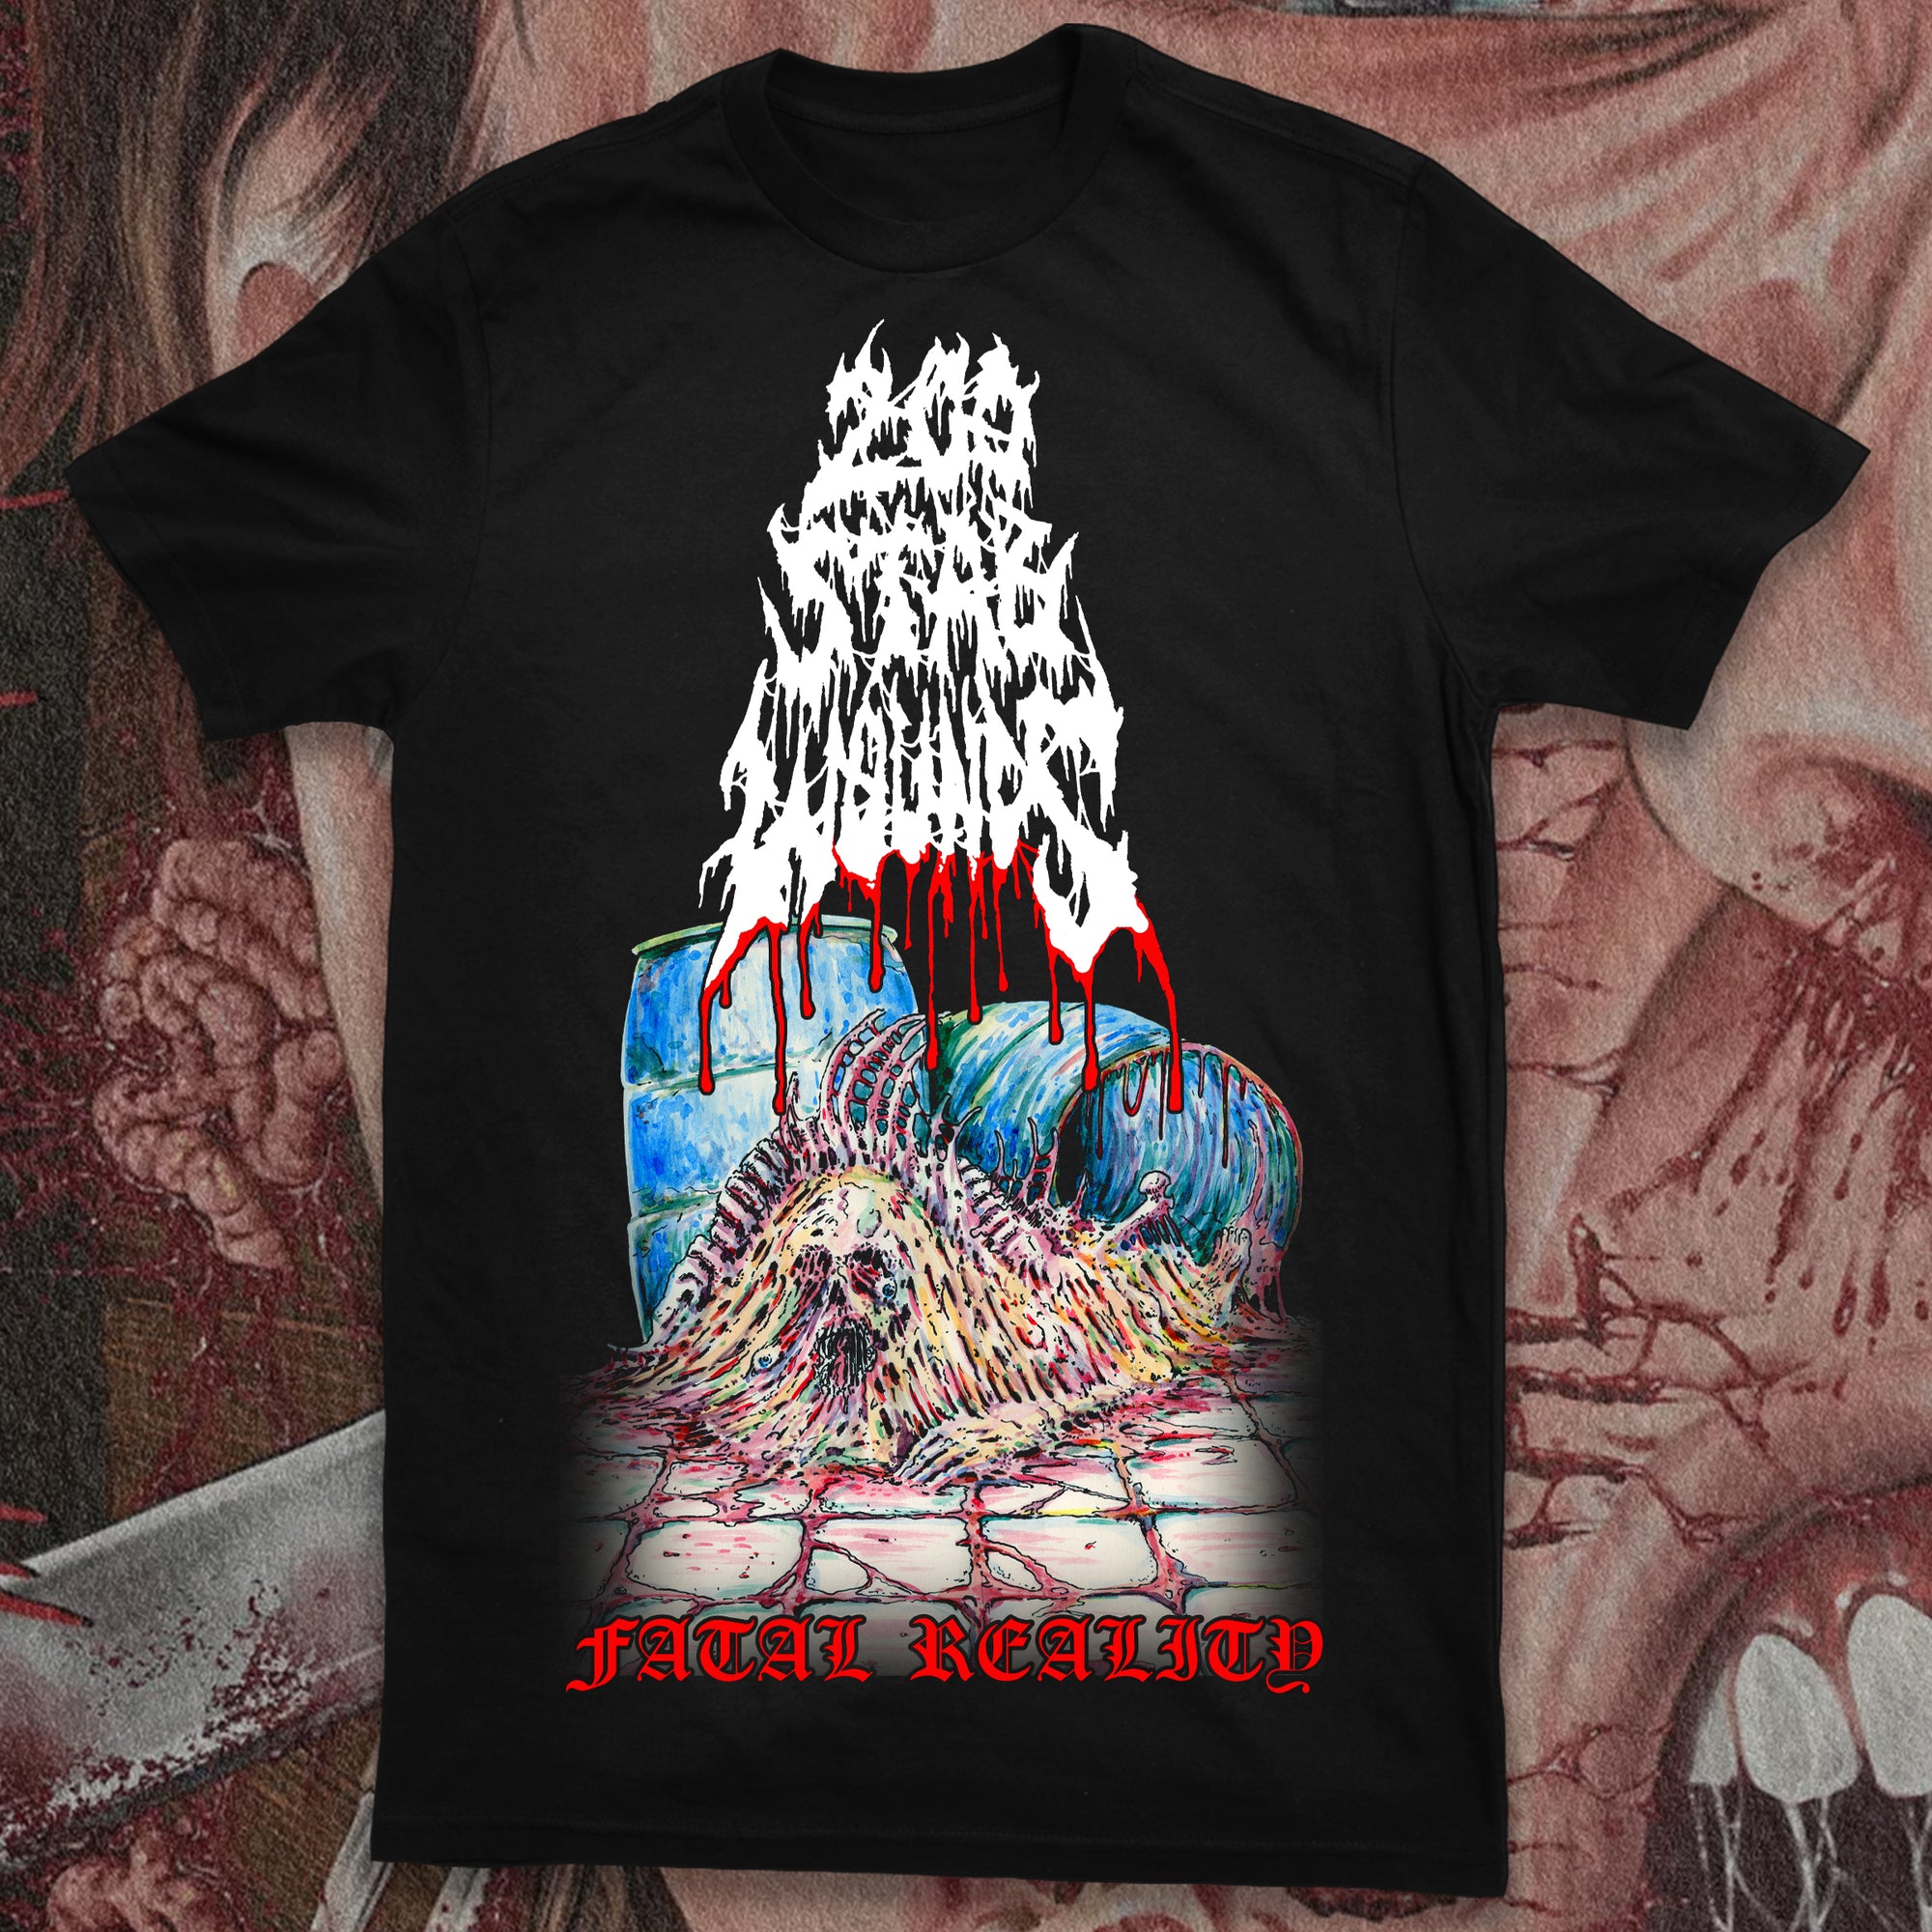 200 STAB WOUNDS "FATAL REALITY" SHIRT (PRE-ORDER)